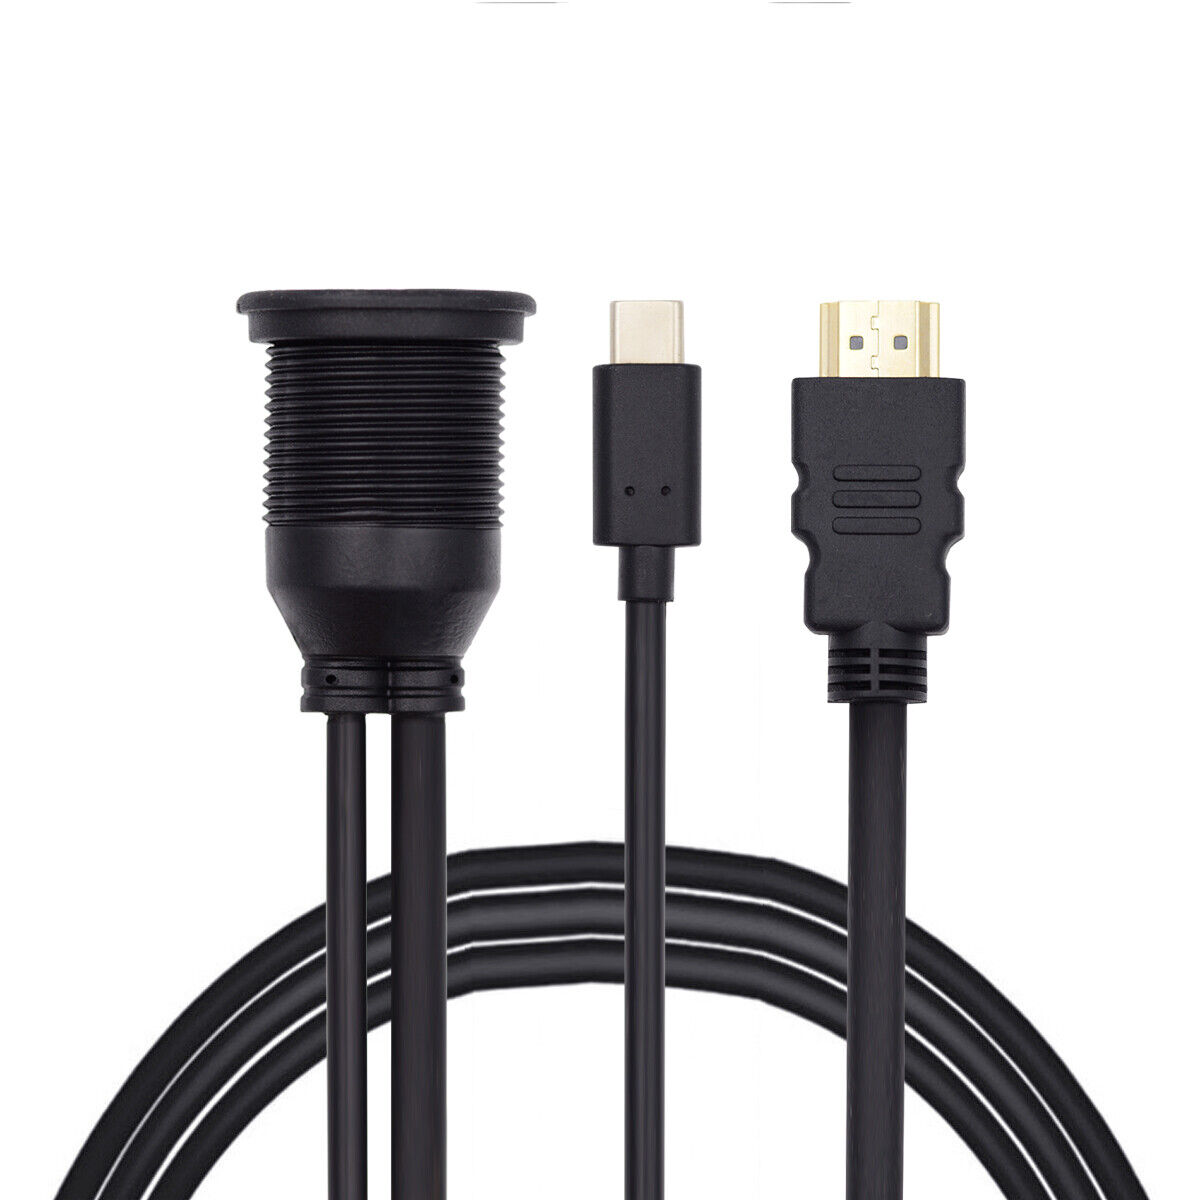 Chenyang Waterproof Dustproof USB-C Type-C USB 3.1 &HDMI 4K Extension Cable